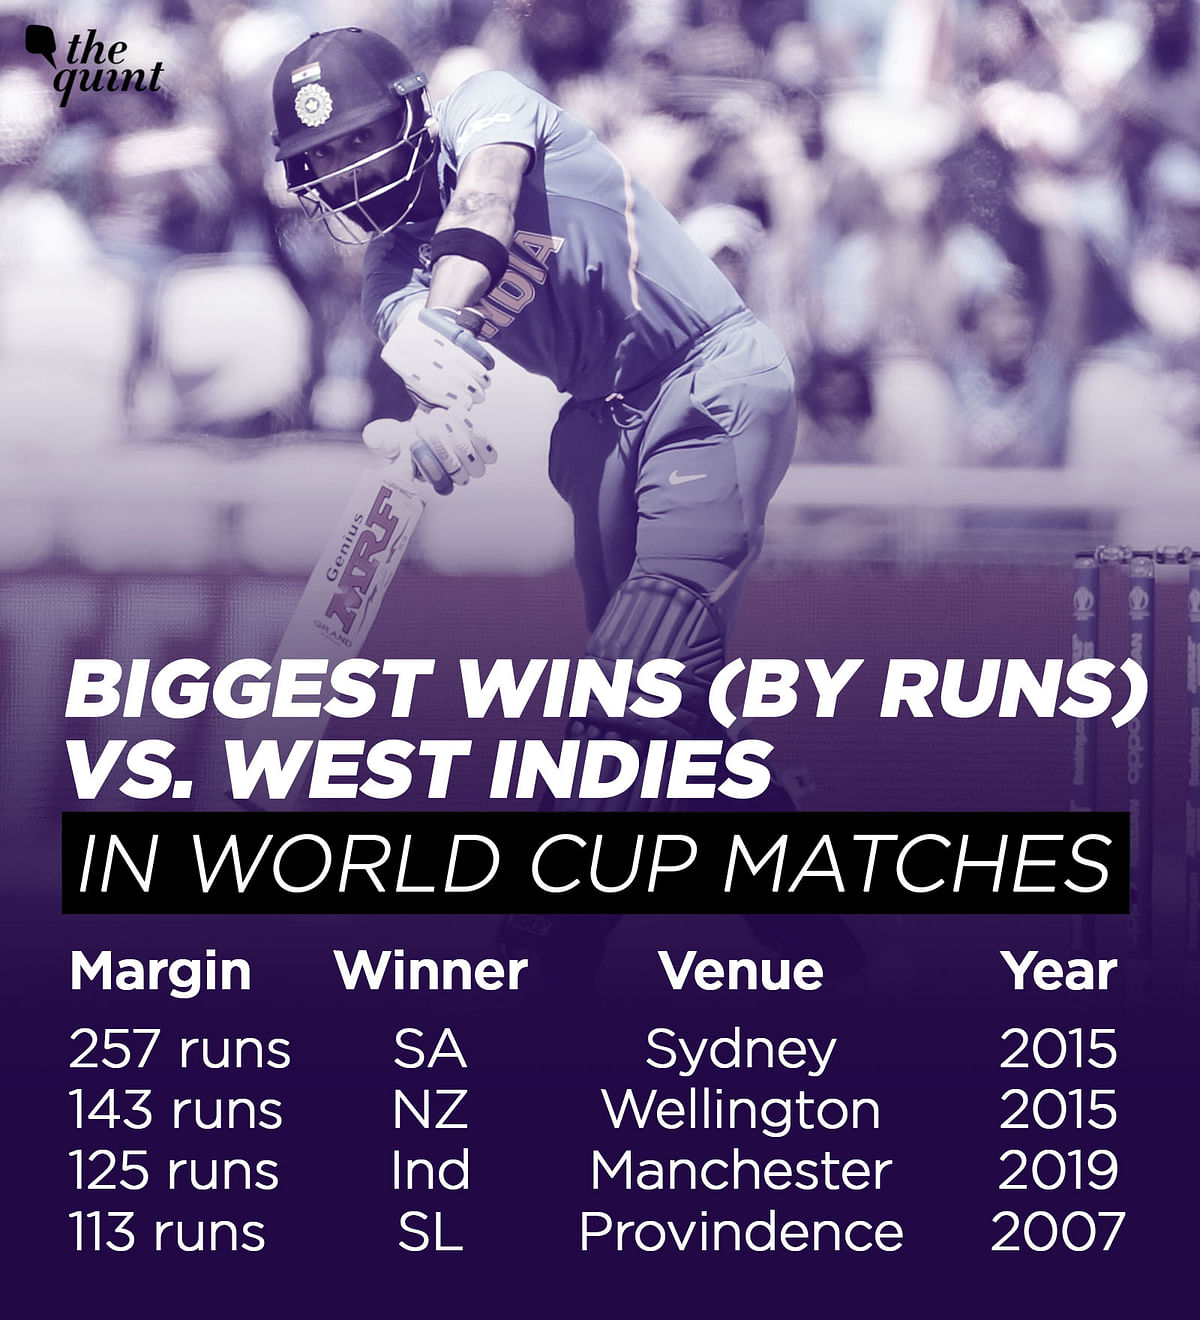 Here’s a look at some of the records Virat Kohli broke or became part of after his innings of 72 against Windies.